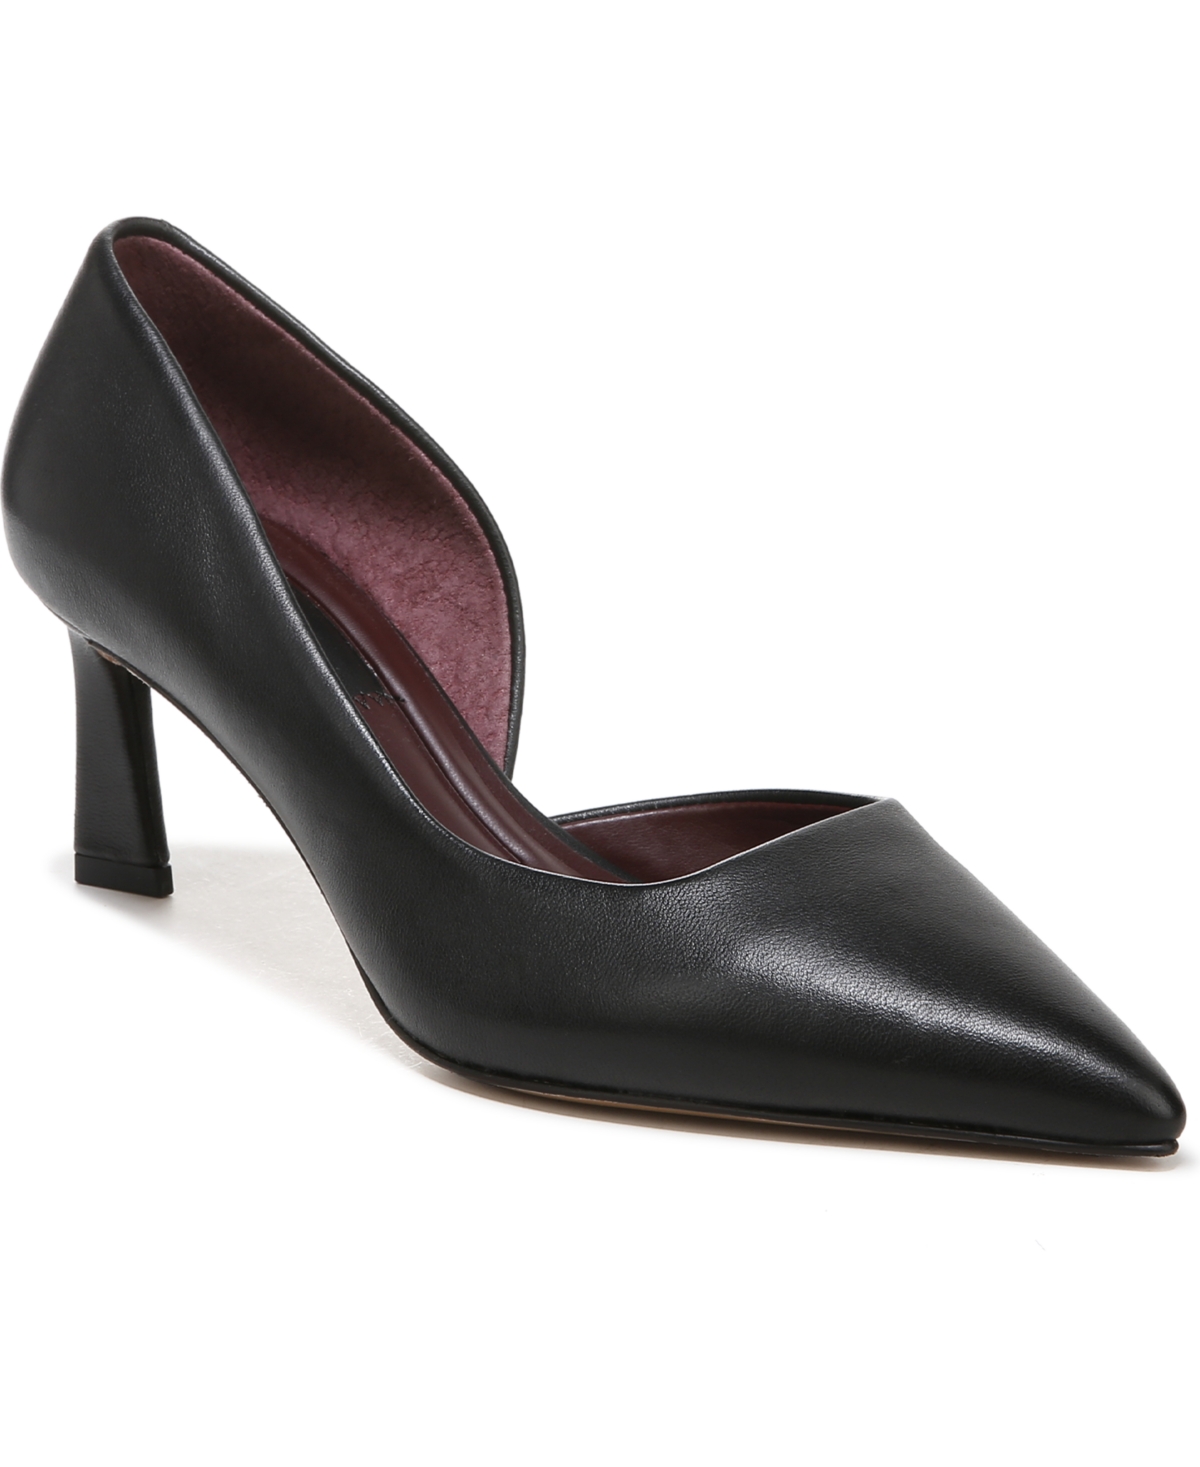 Women's Tana Pointed Toe Pumps - Black Leather